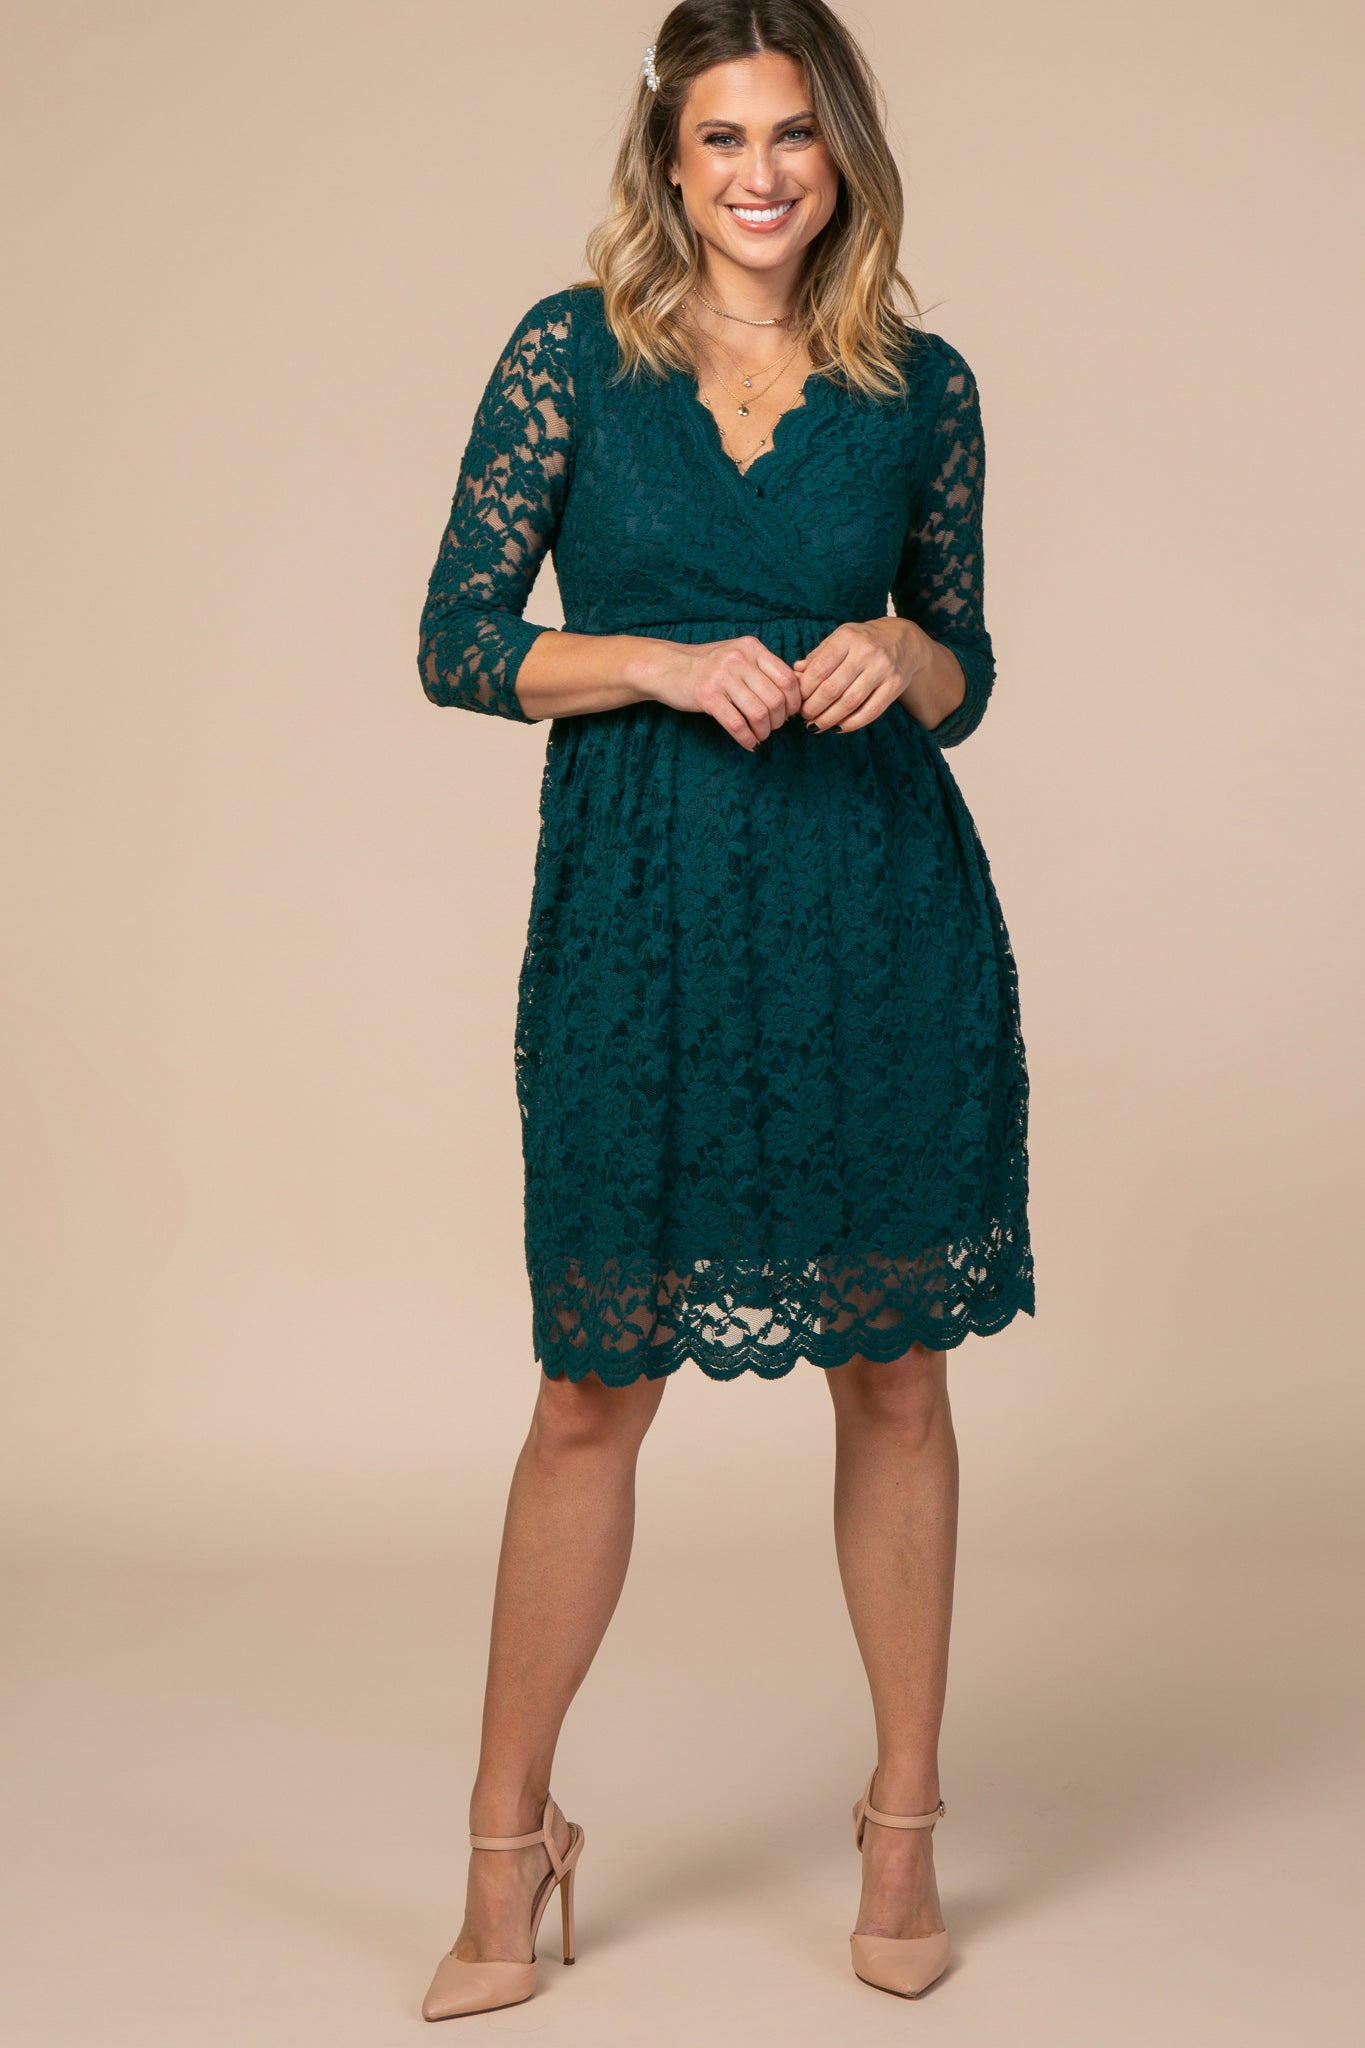 Overlay Wrap Green PinkBlush Forest Dress– Lace